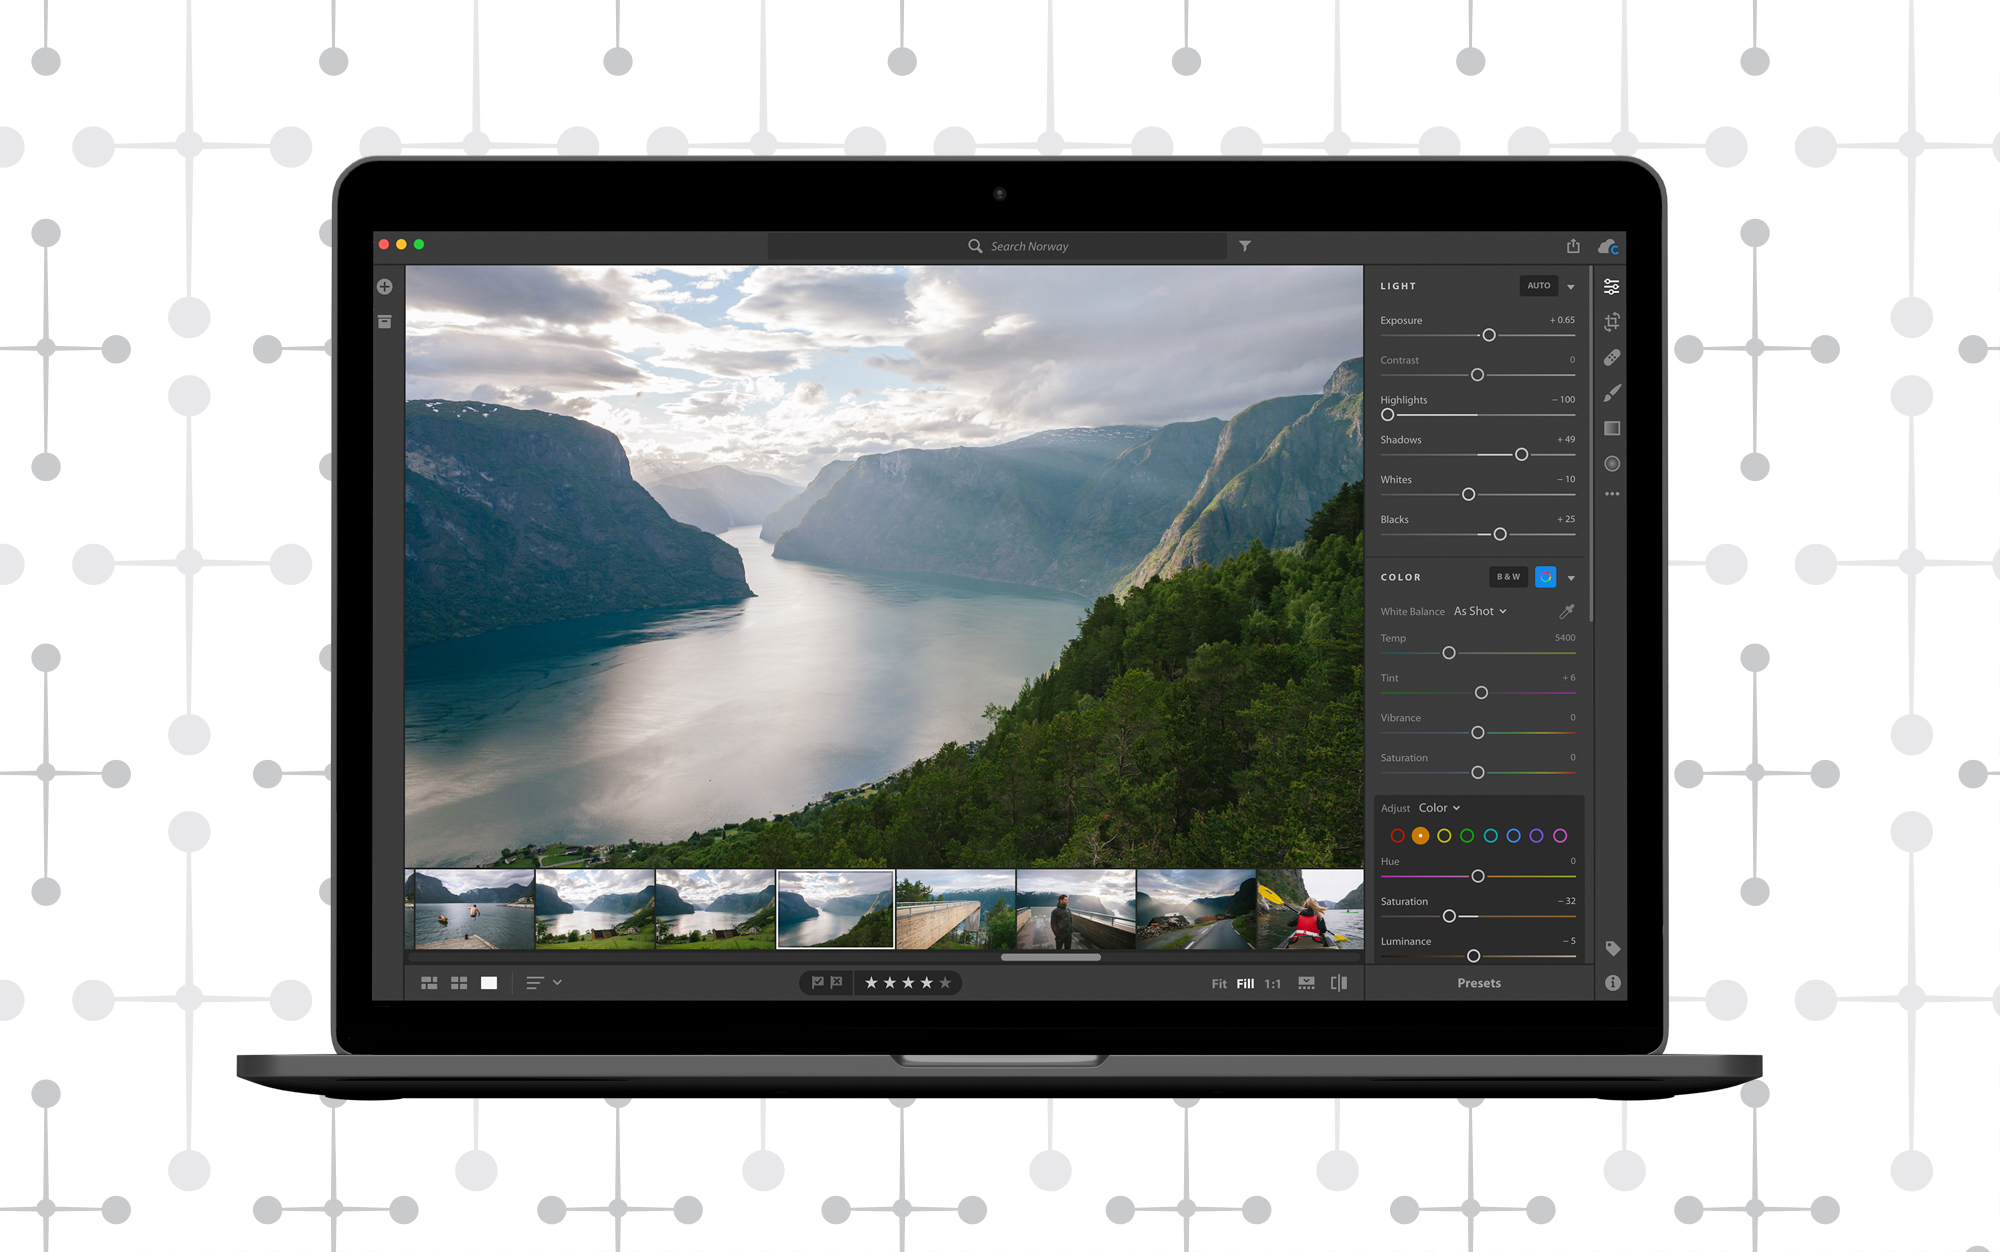 Adobe Creative Cloud Photography plan with 20GB storage | 1 Year Subscription